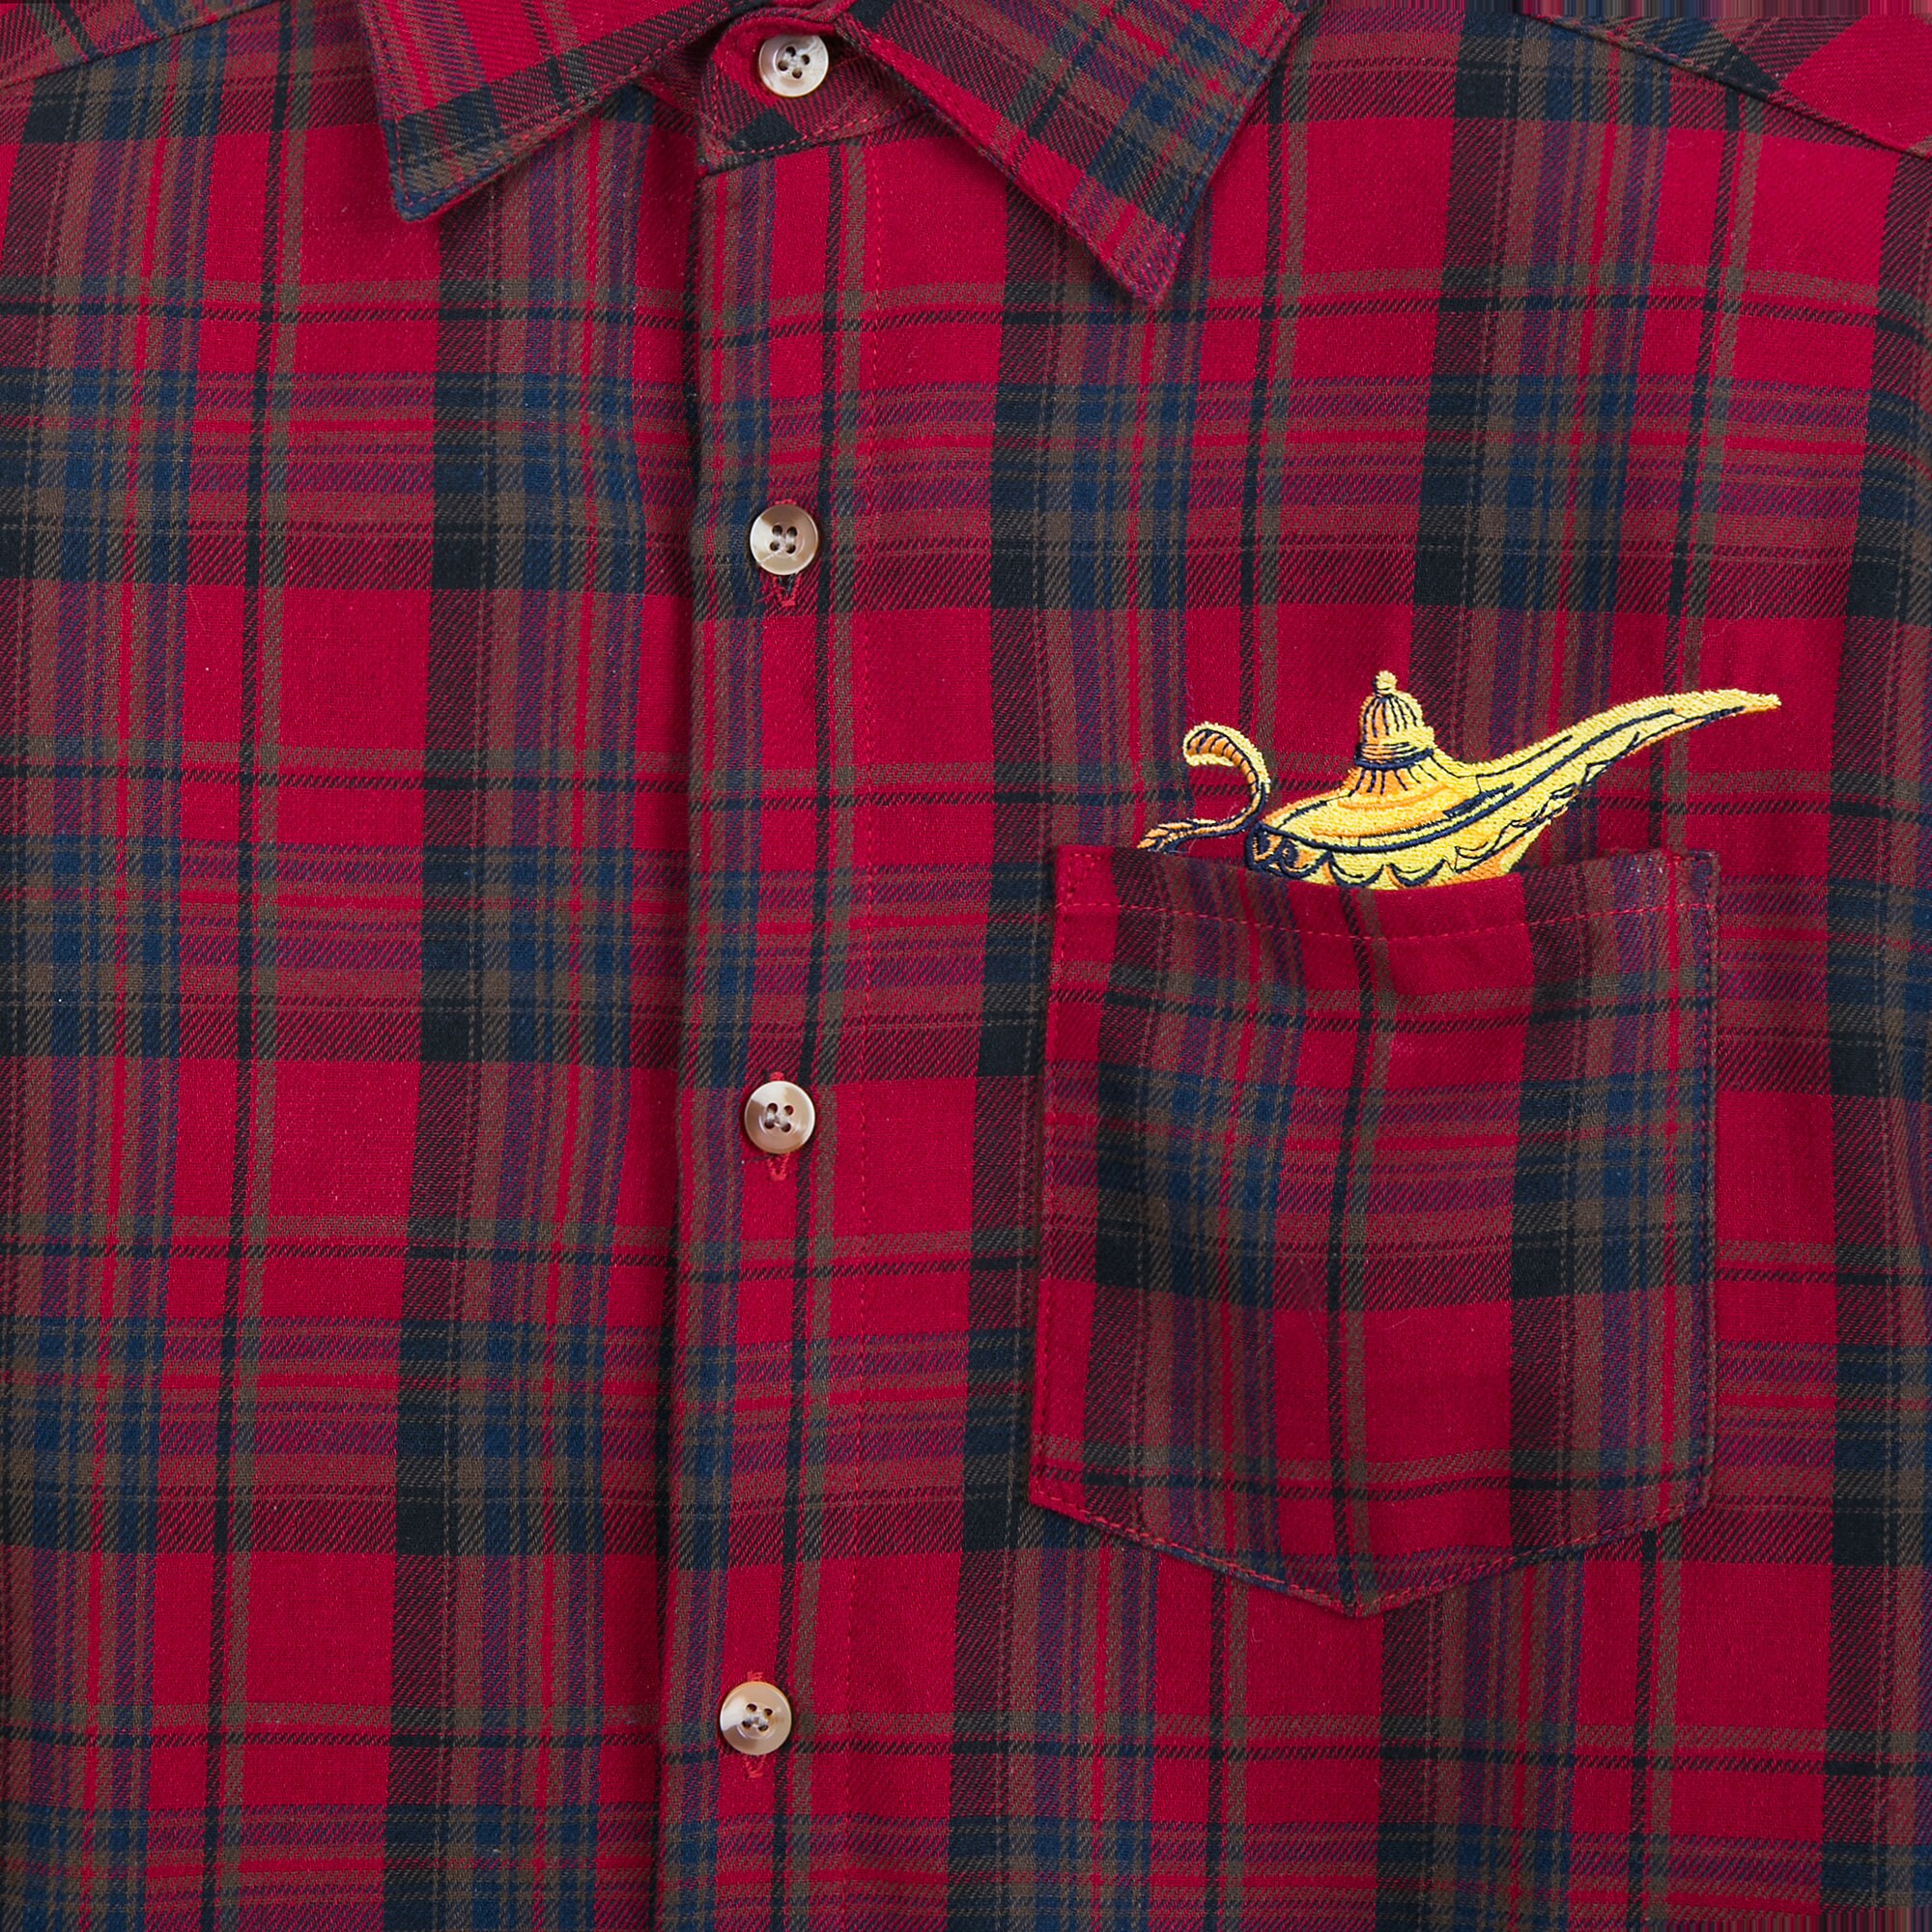 Aladdin Genie Lamp Flannel Shirt for Adults by Cakeworthy - Live Action Film